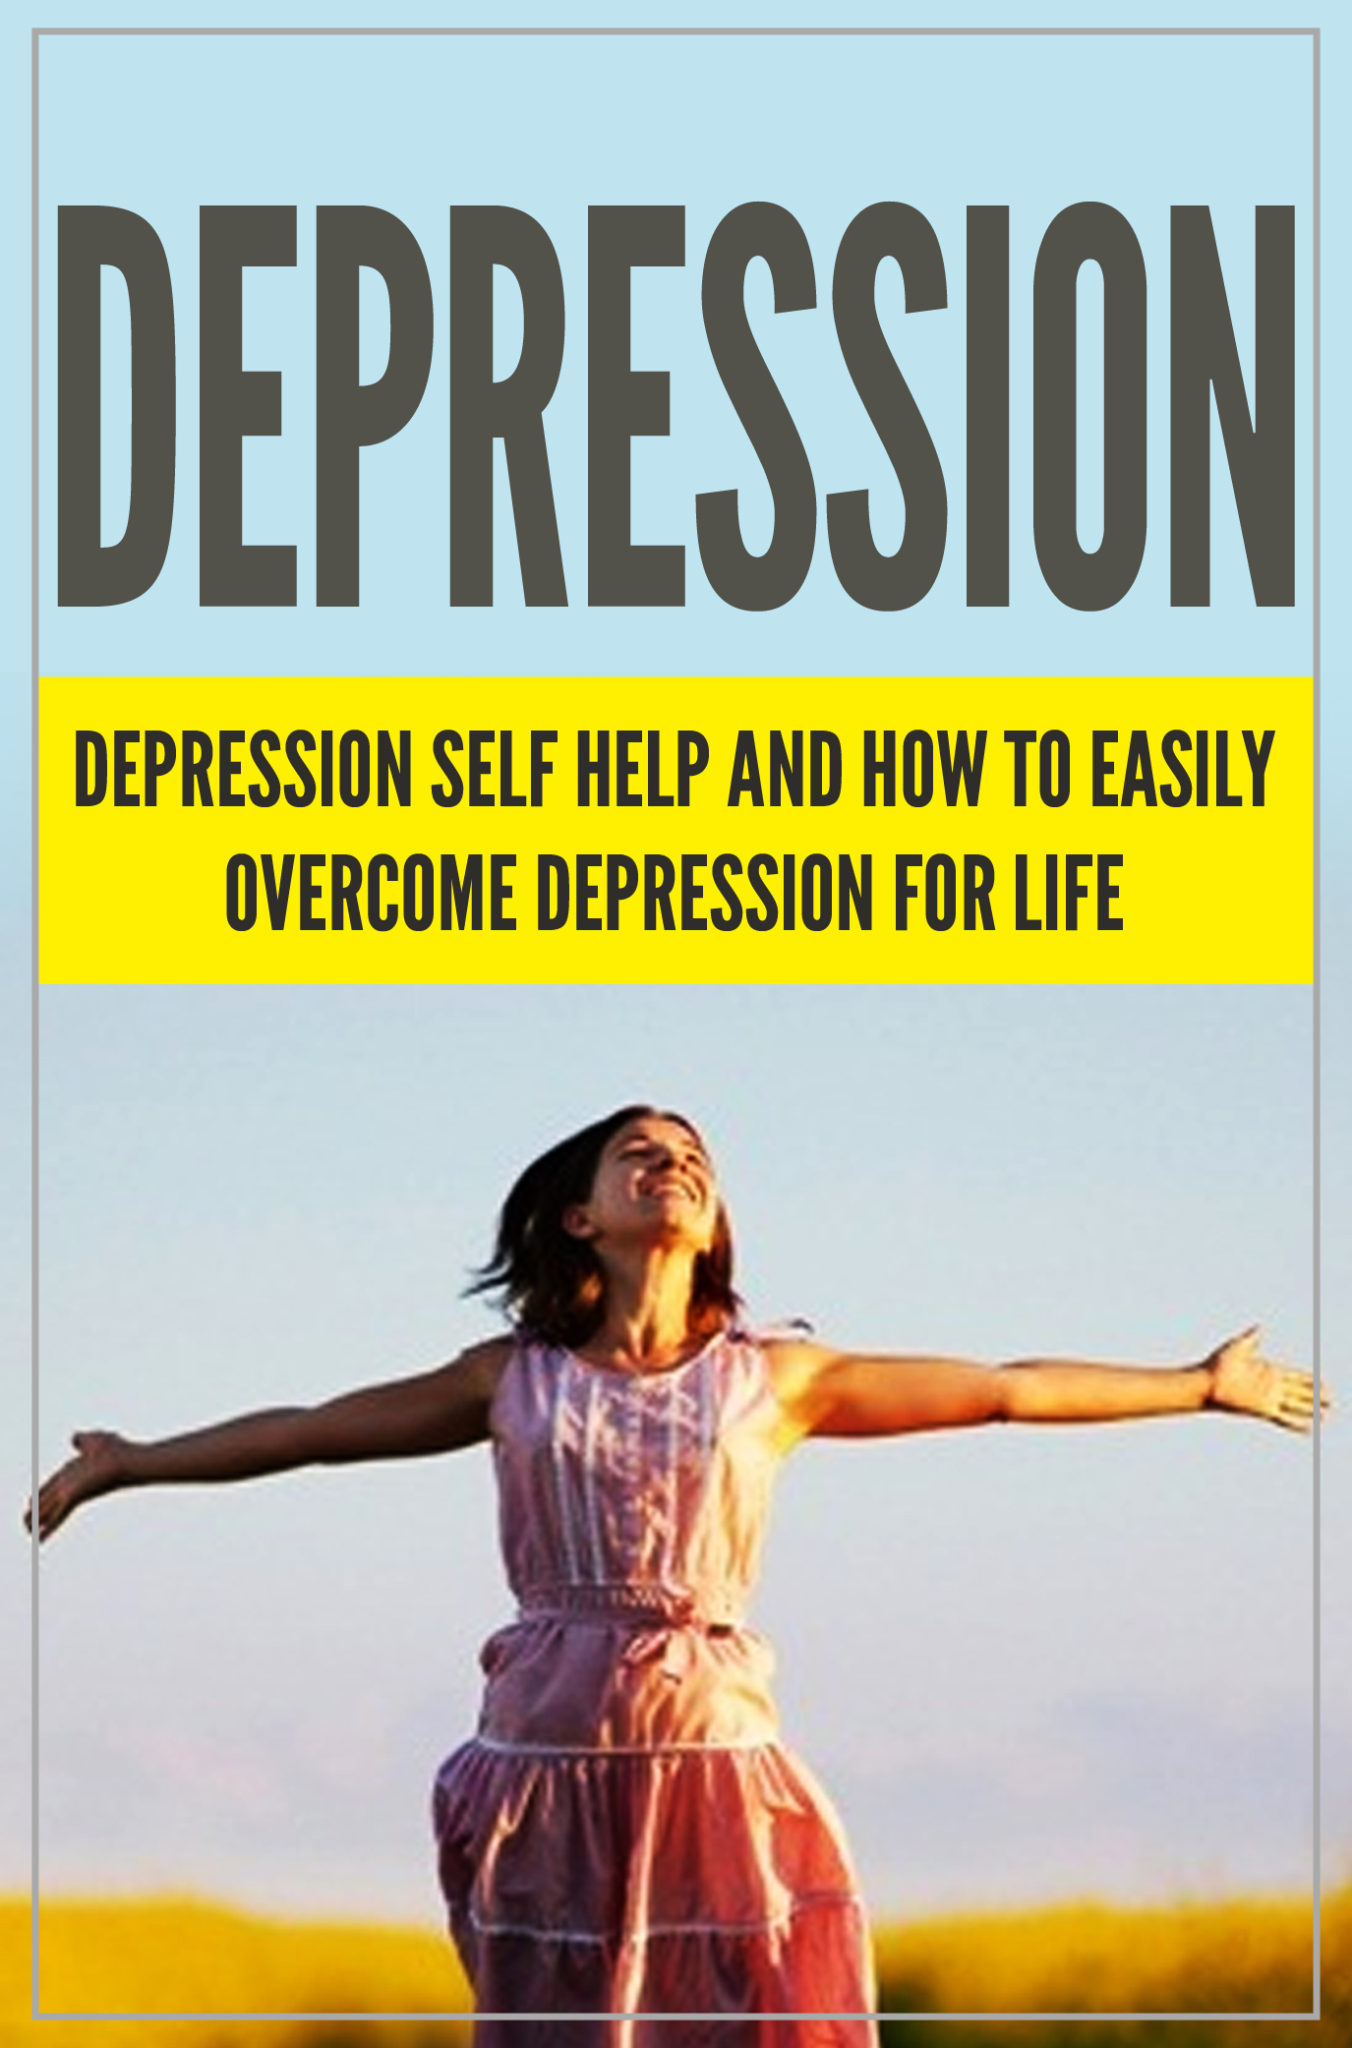 FREE: Depression: Depression Self Help And How To Easily Overcome Depression For Life (Depression Cure, Suicide, Stress, OCD, Bipolar, Major Depression, Dysthymia) by Otto Viteri